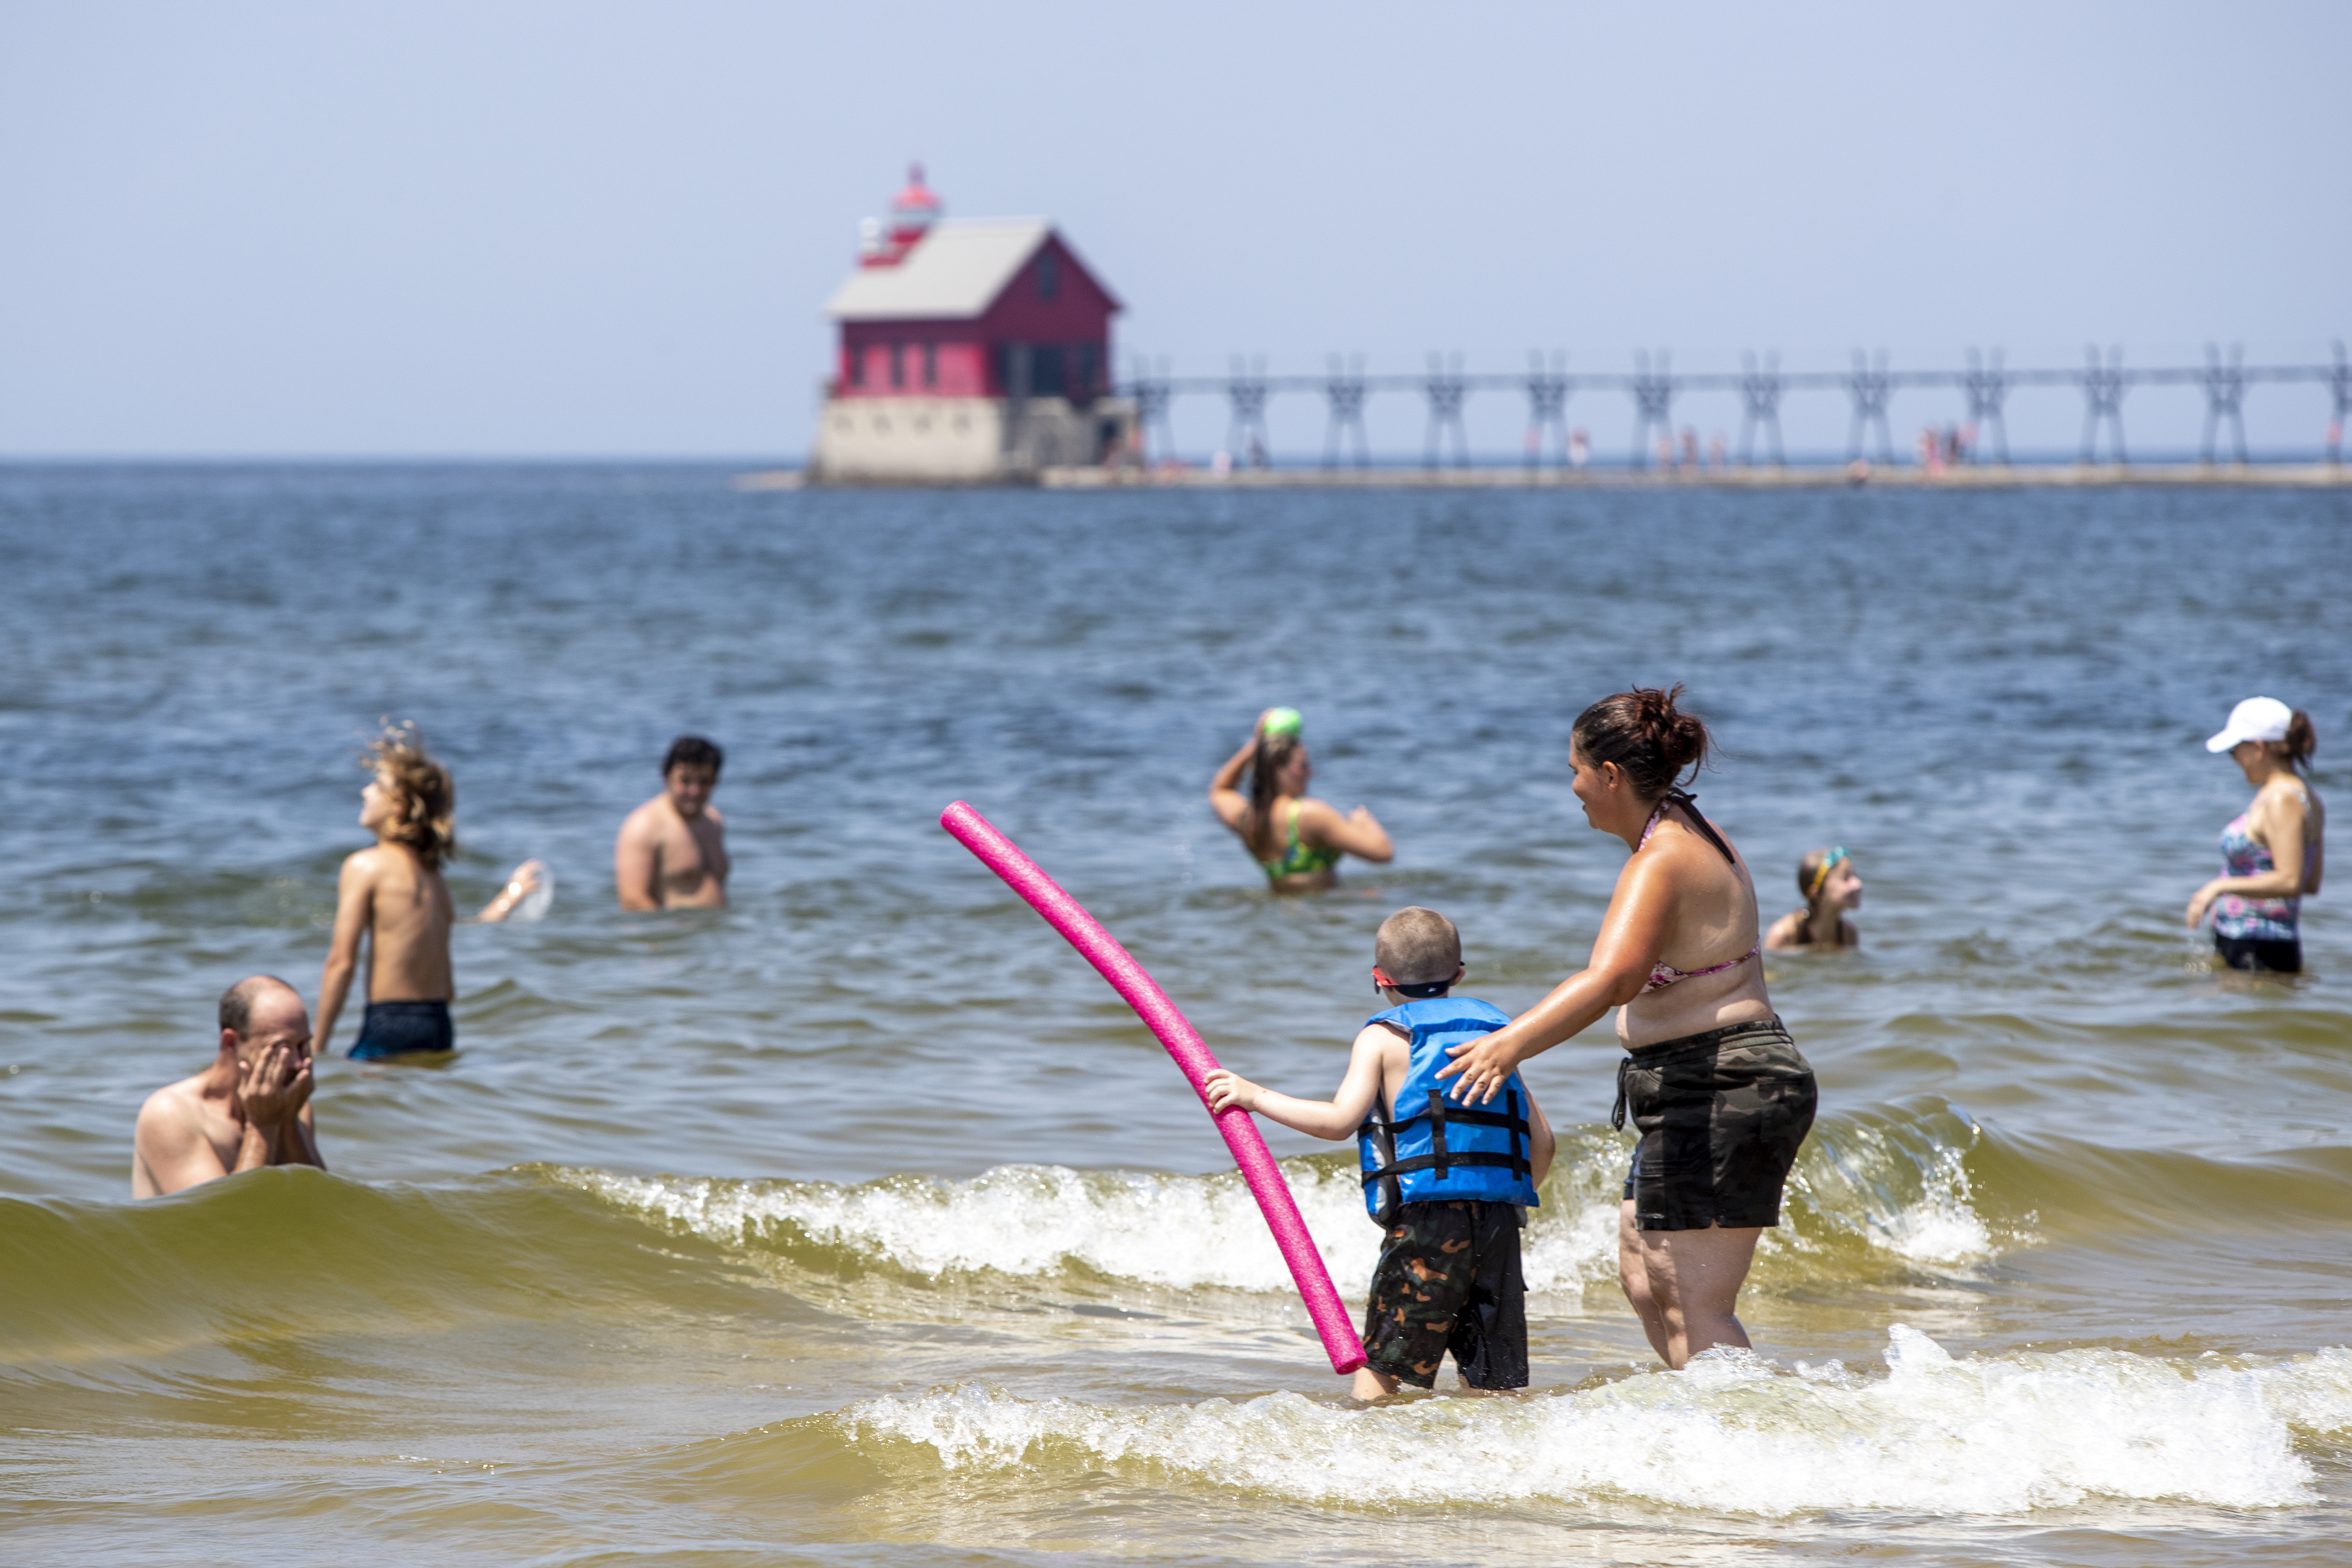 Harbor Transit will run a free beach shuttle from several locations in Grand Haven this summer. (Cory Morse | MLive.com)
